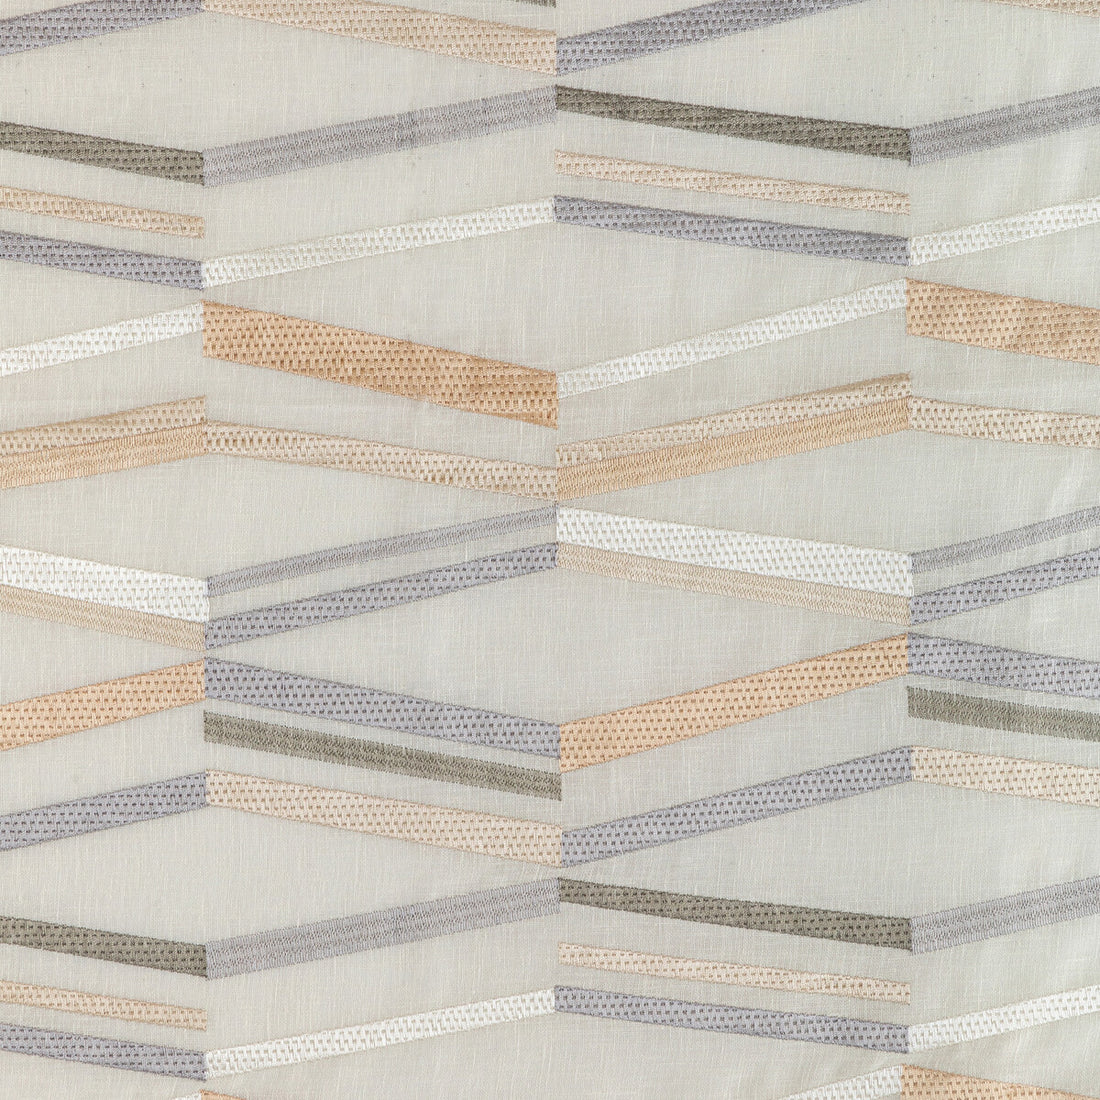 Parabola fabric in quartz color - pattern 4248.11.0 - by Kravet Couture in the Modern Luxe III collection